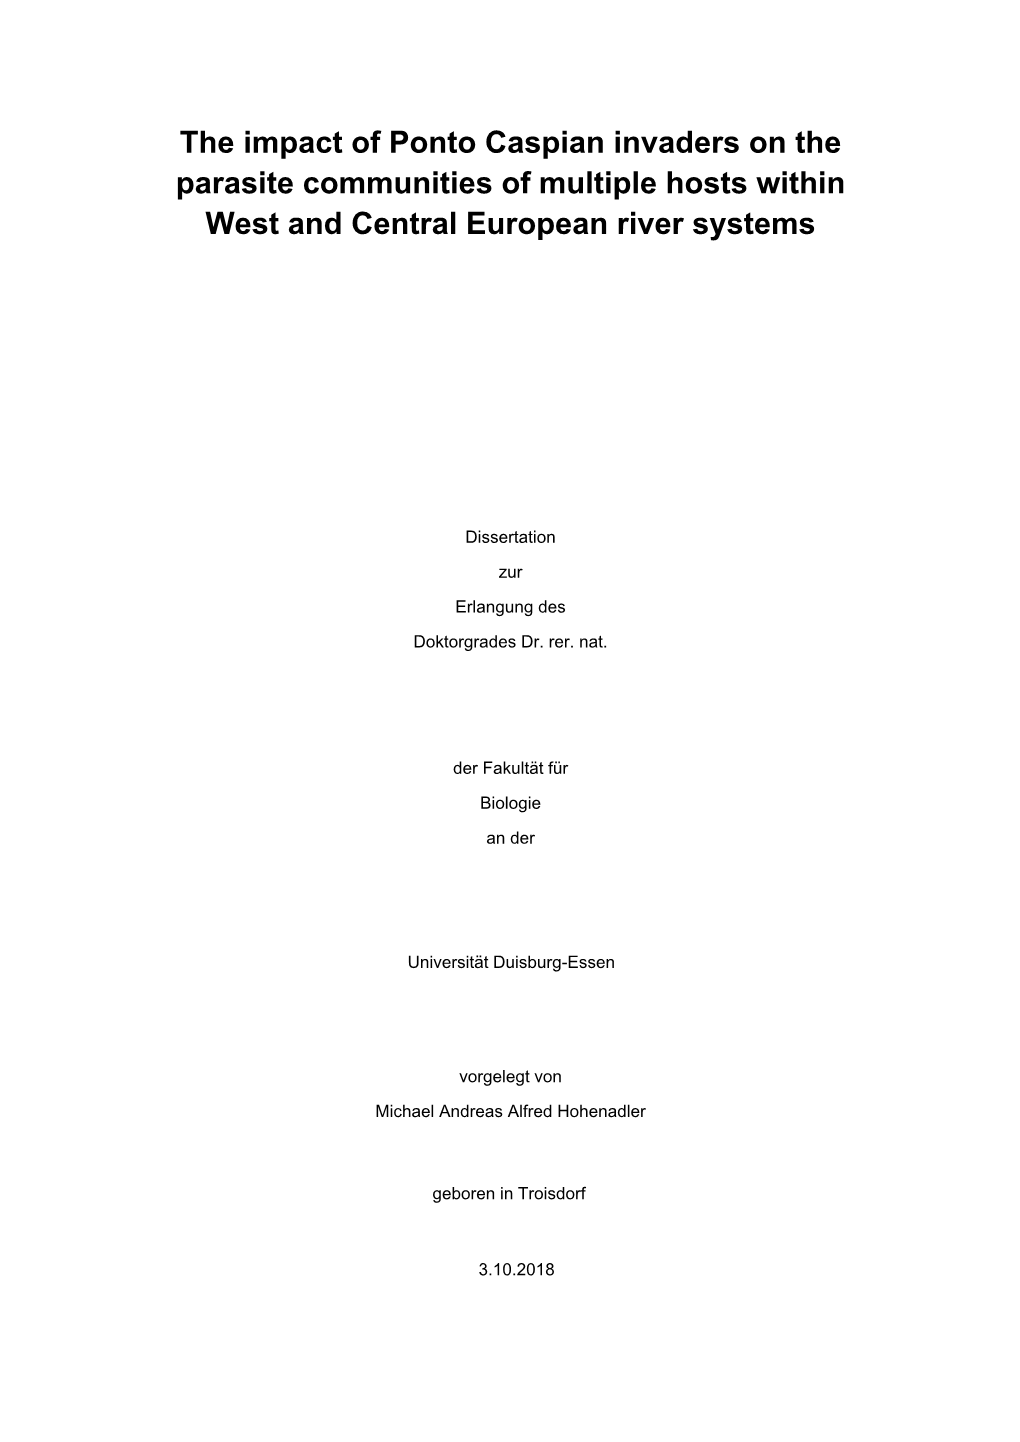 The Impact of Ponto Caspian Invaders on the Parasite Communities of Multiple Hosts Within West and Central European River Systems